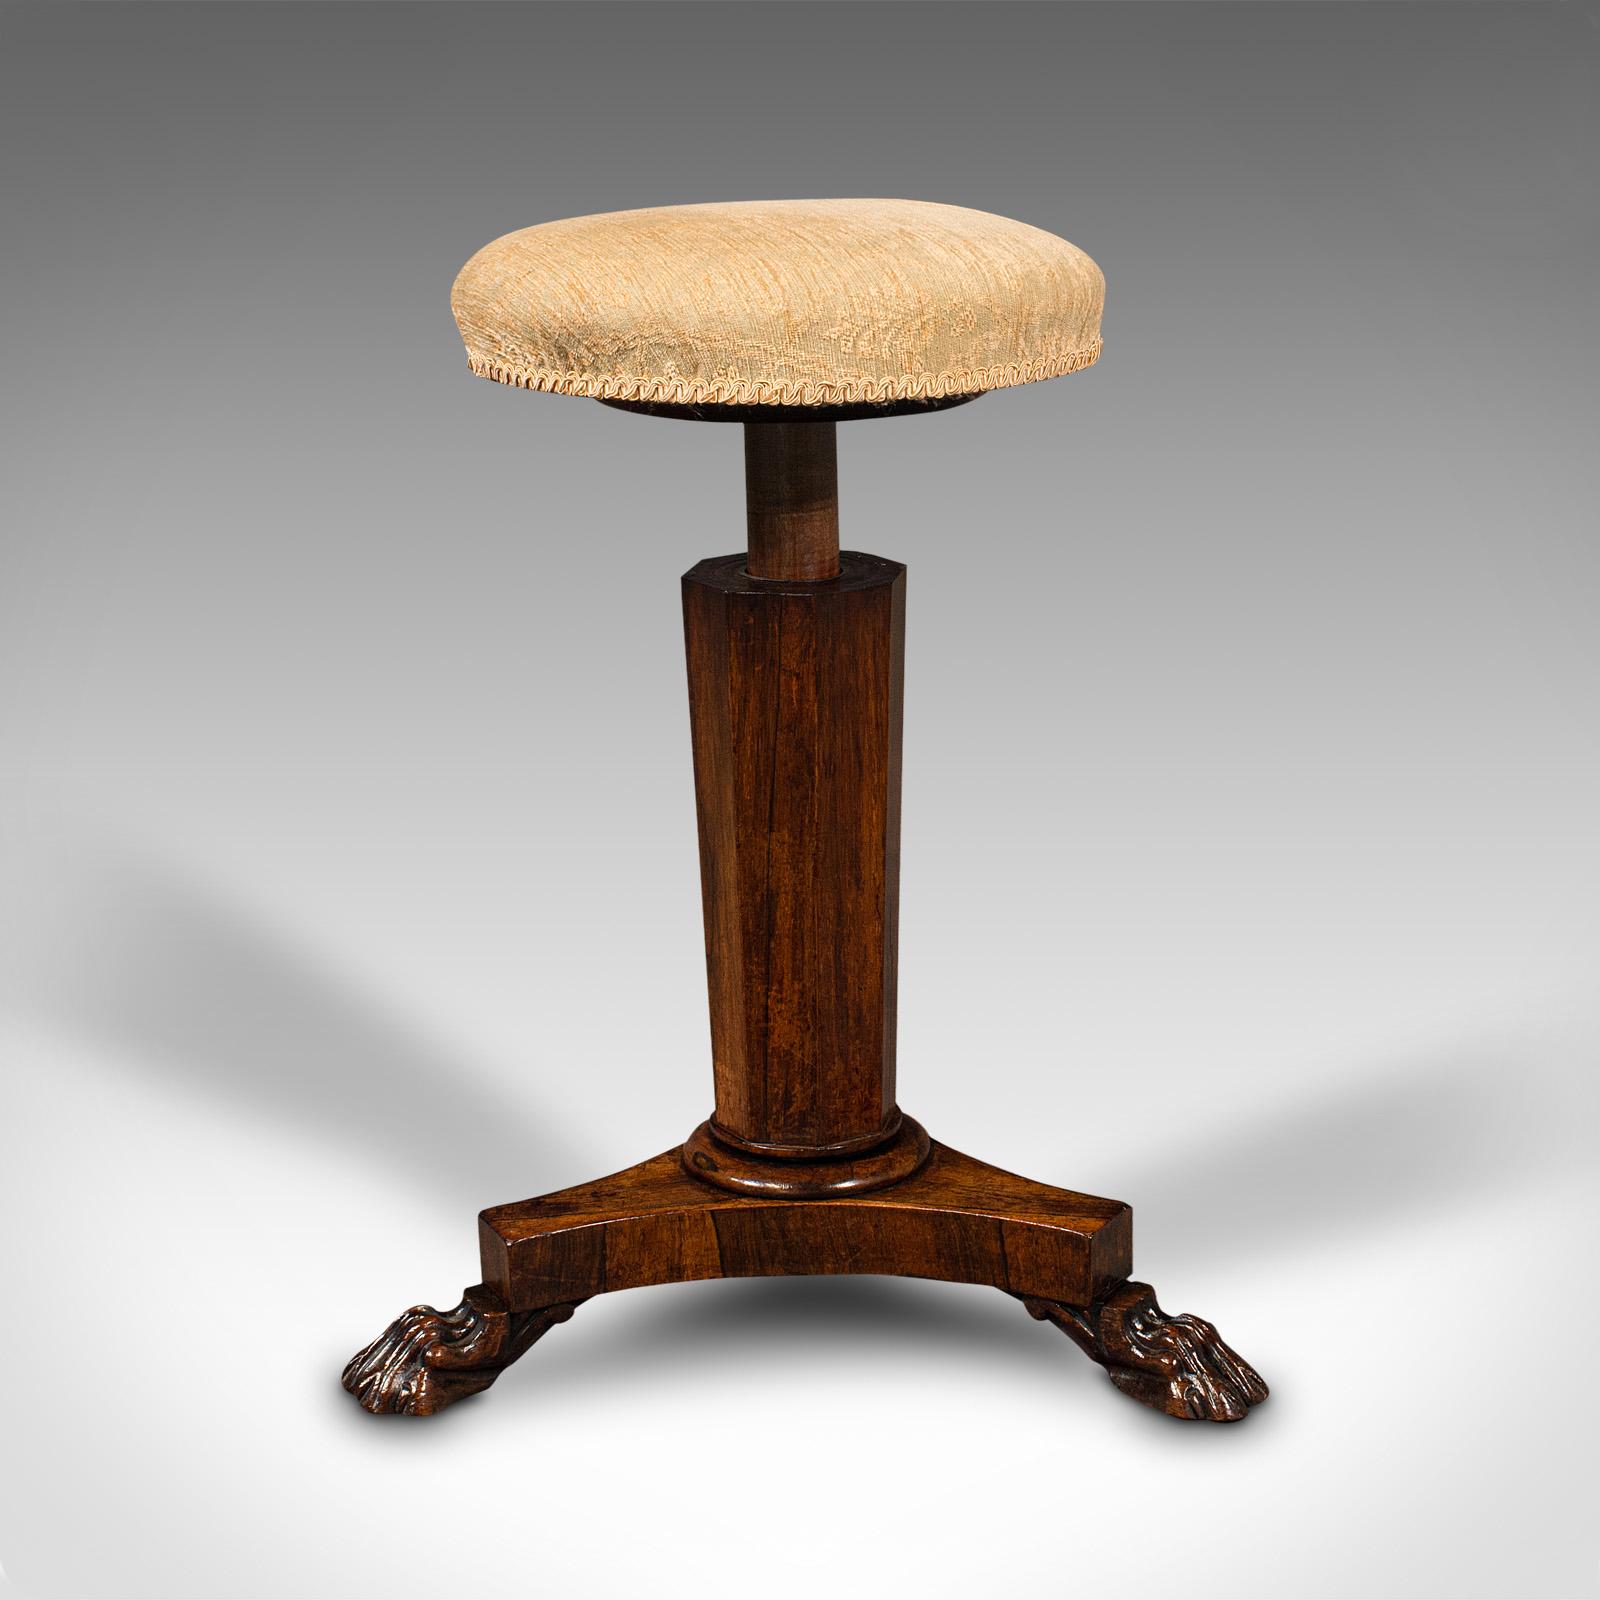 This is an antique music stool. An English, rosewood adjustable piano recital stool, dating to the Regency period, circa 1820.

Attractive music stool with adjustable height and fascinating form.
Displays a desirable aged patina and in very good